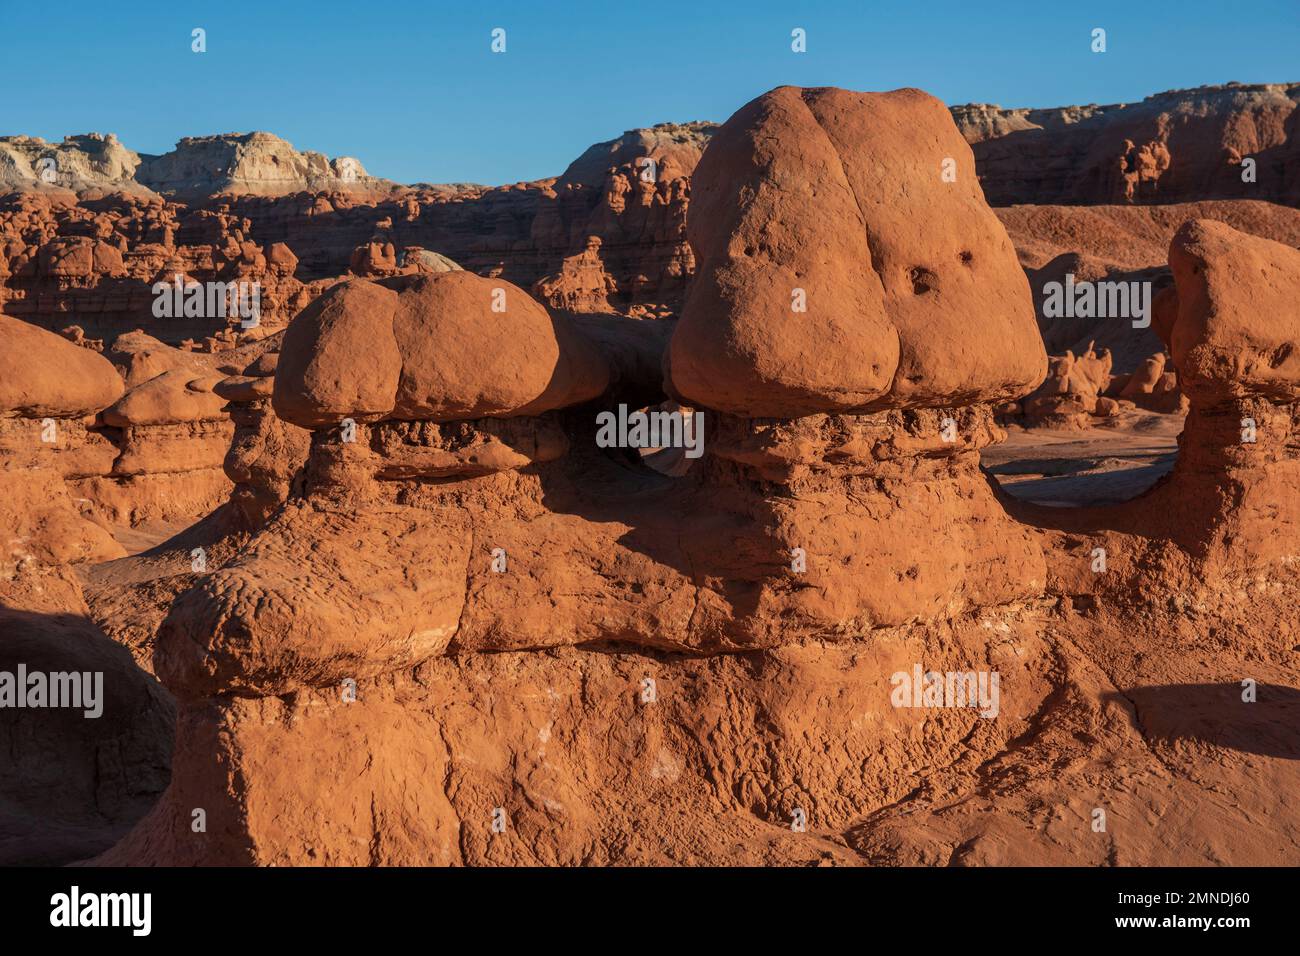 Utah's Goblin Valley State Park is full of sandstone rock formations that take the shape of humanoid characters. Stock Photo